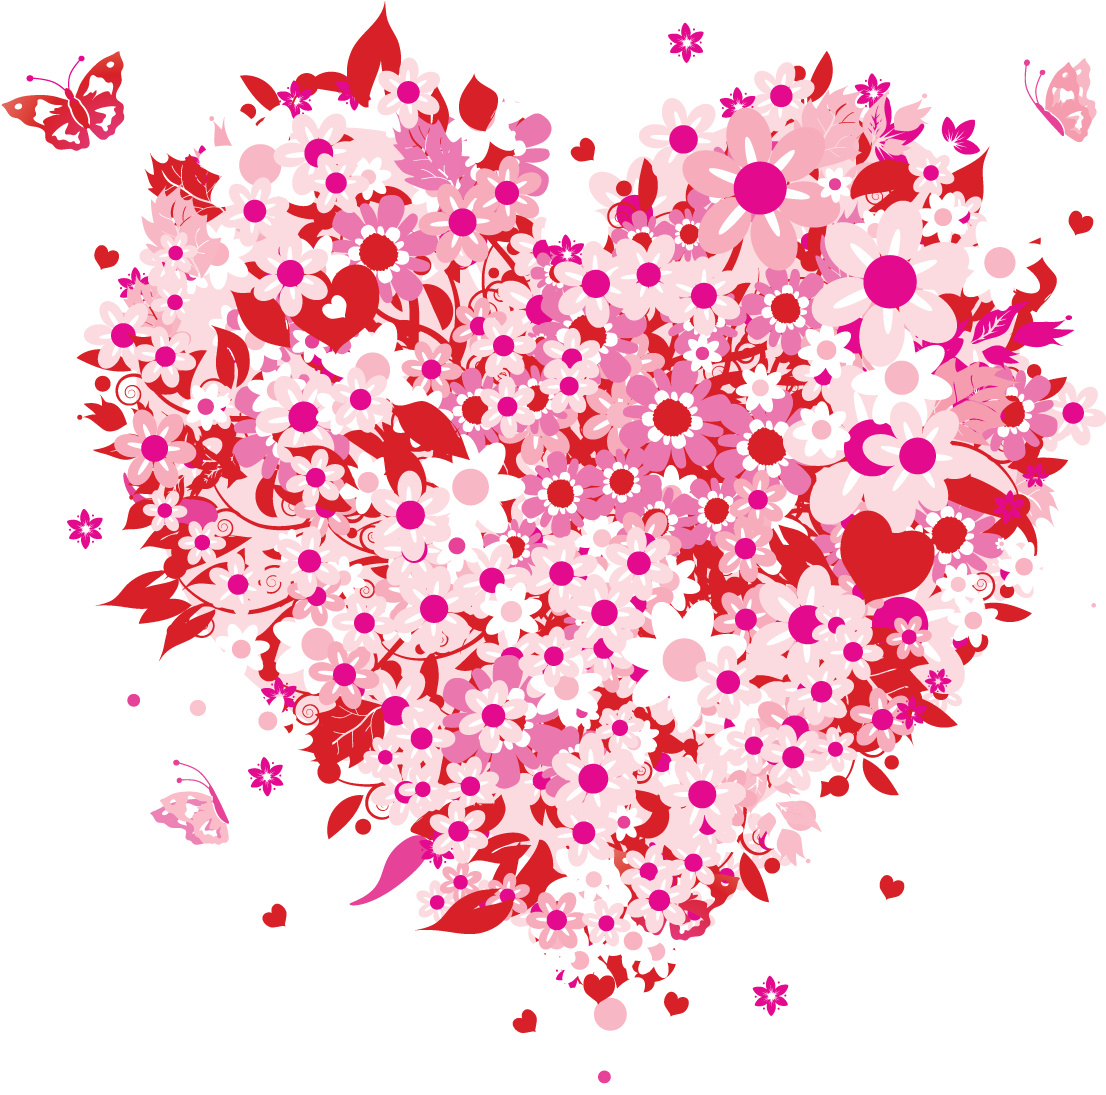 Daily Prompthi, Mom - Mothers Day Hearts Png (1200x1200)